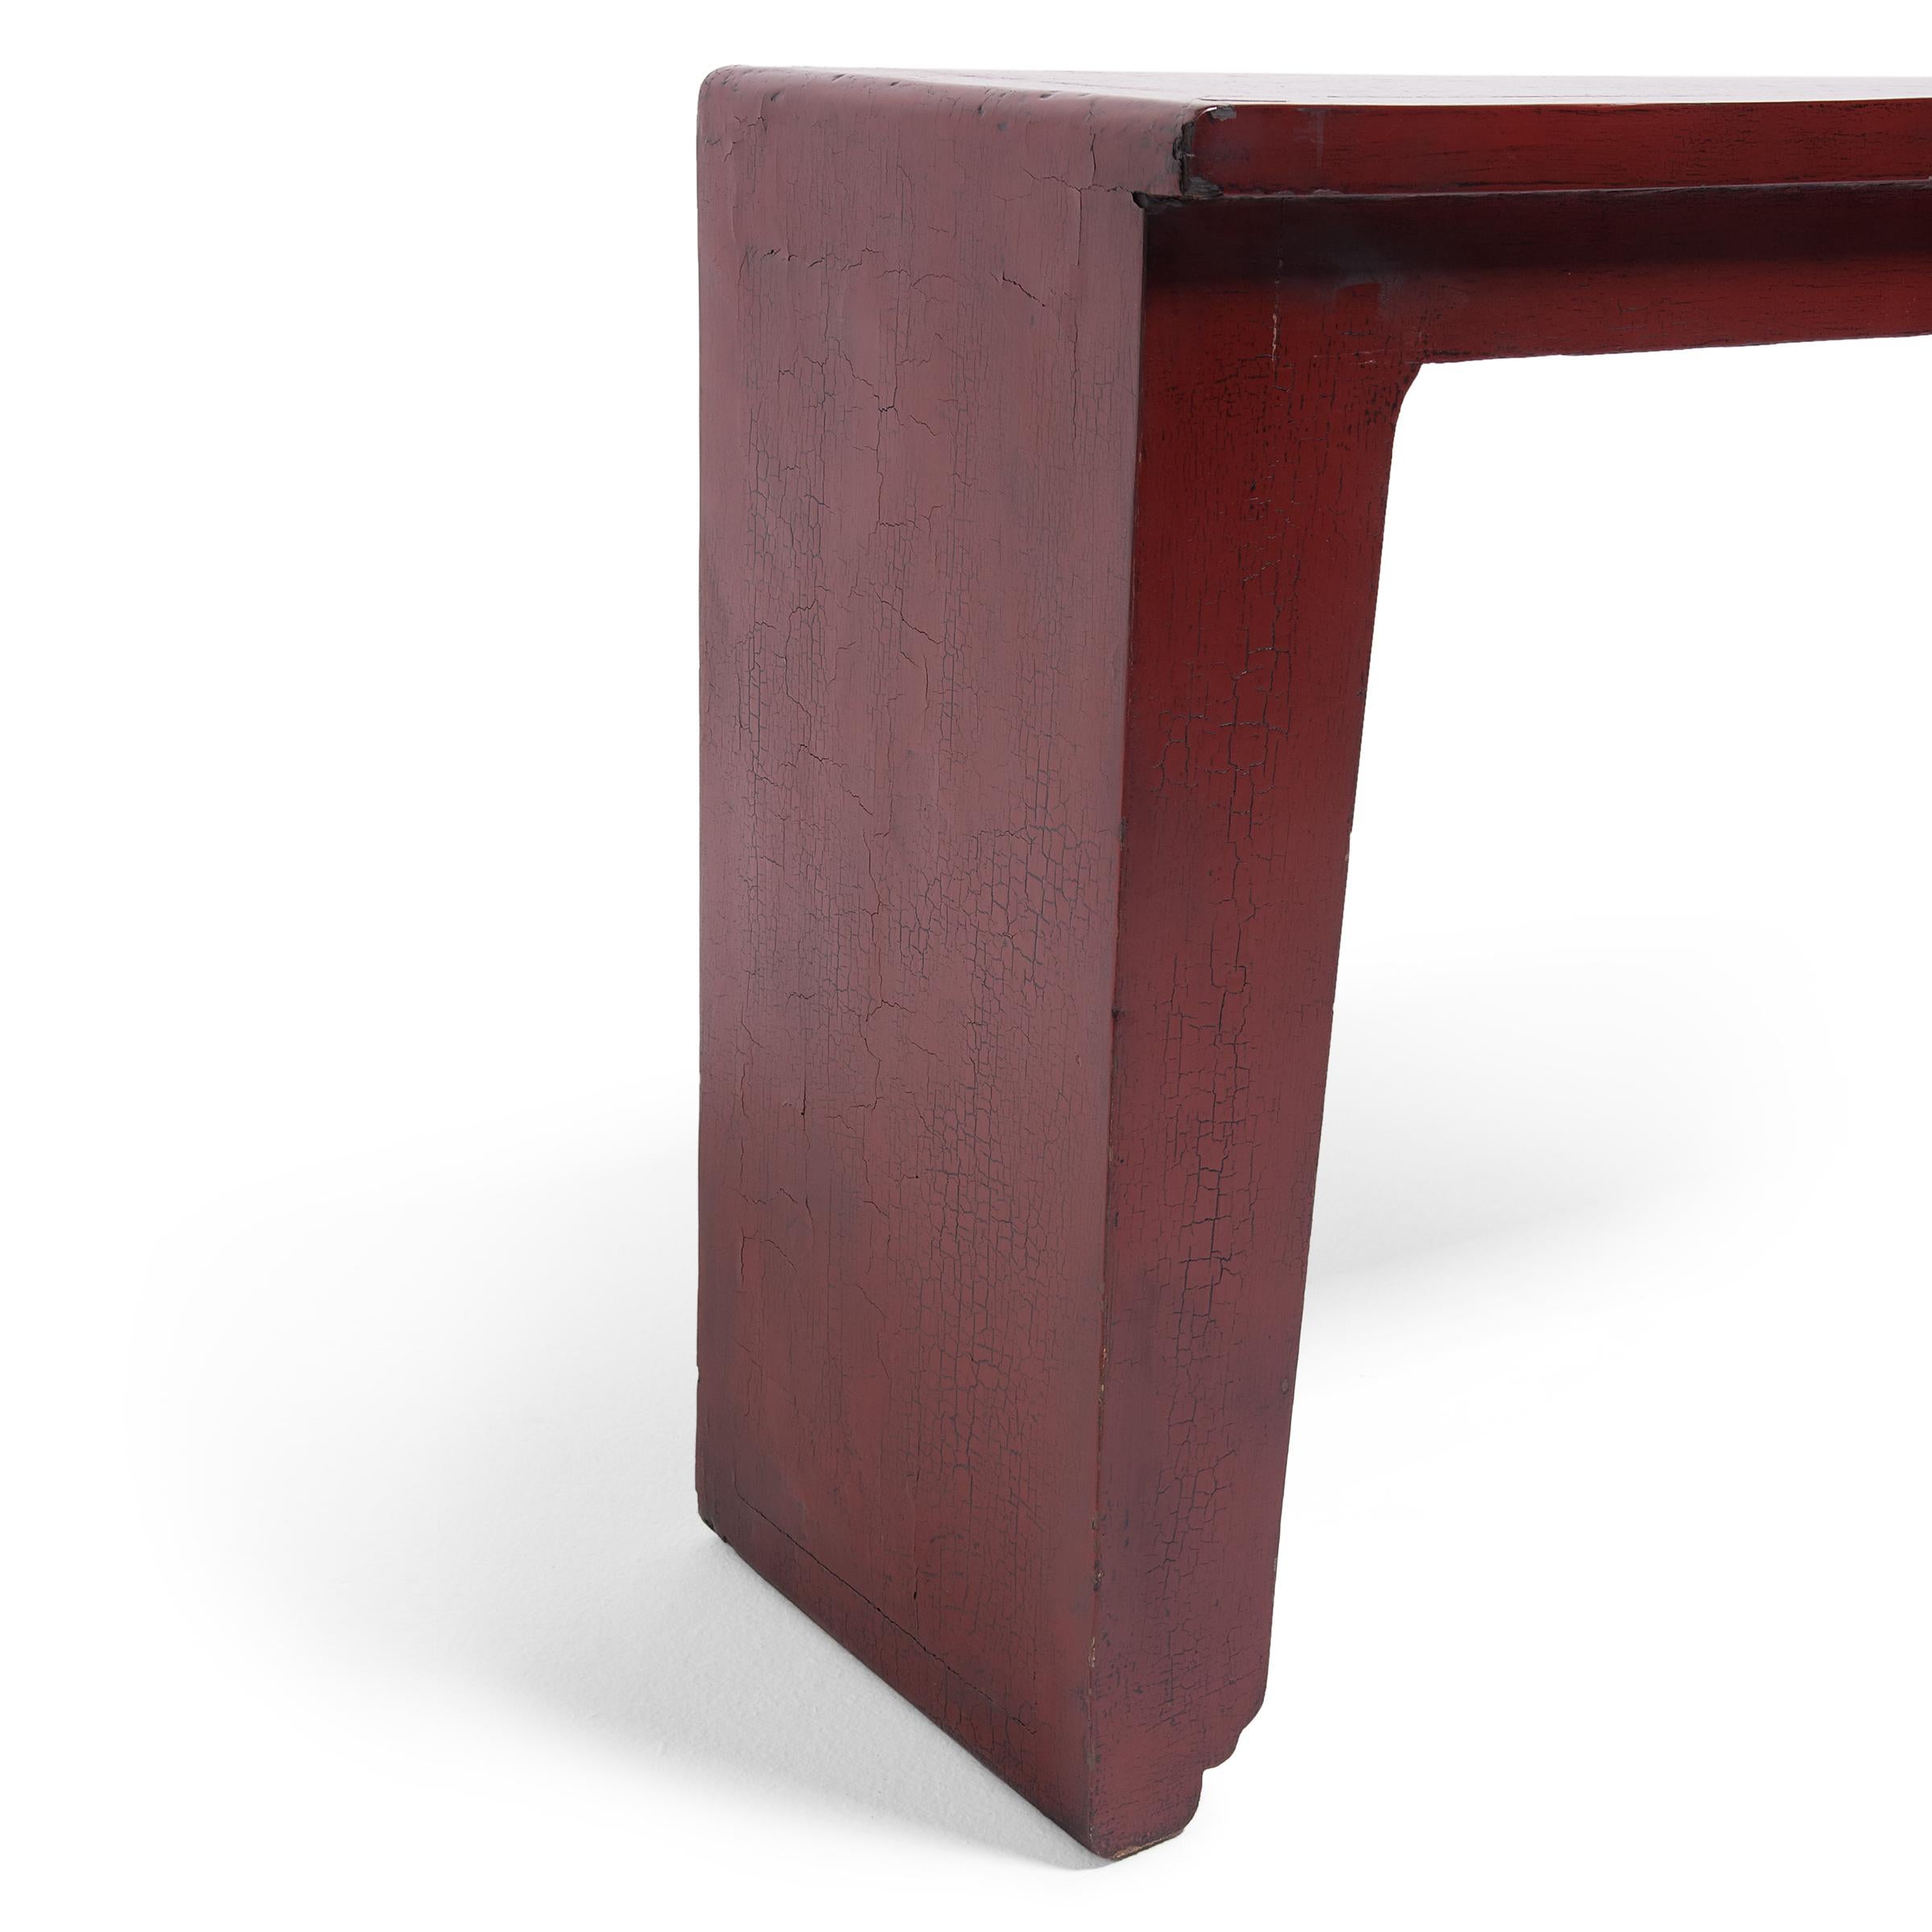 Elm Chinese Red Lacquer Console Table, c. 1900